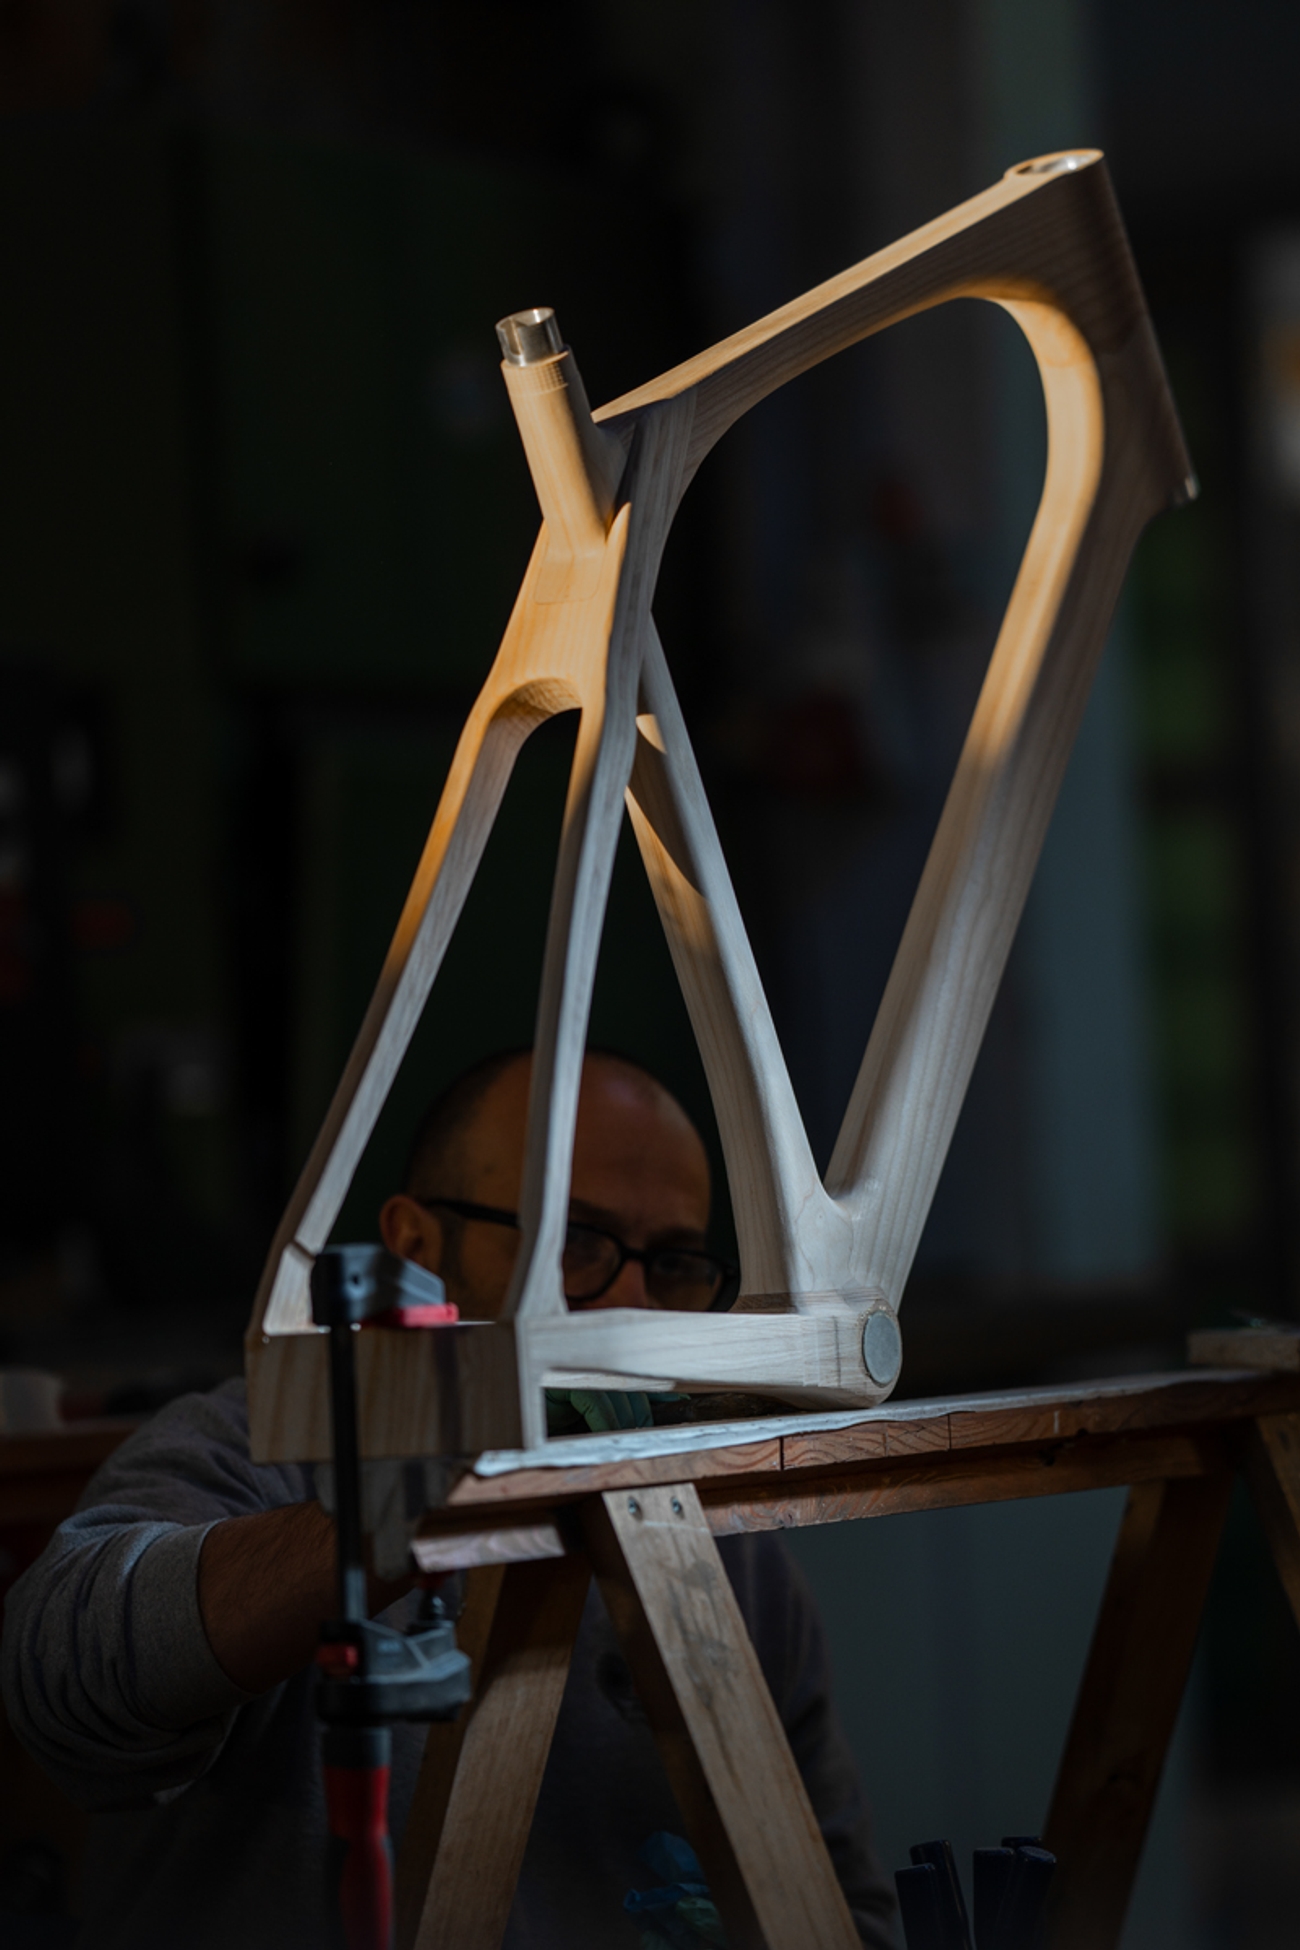 The frame is made from glued wooden parts, with aluminium hardware